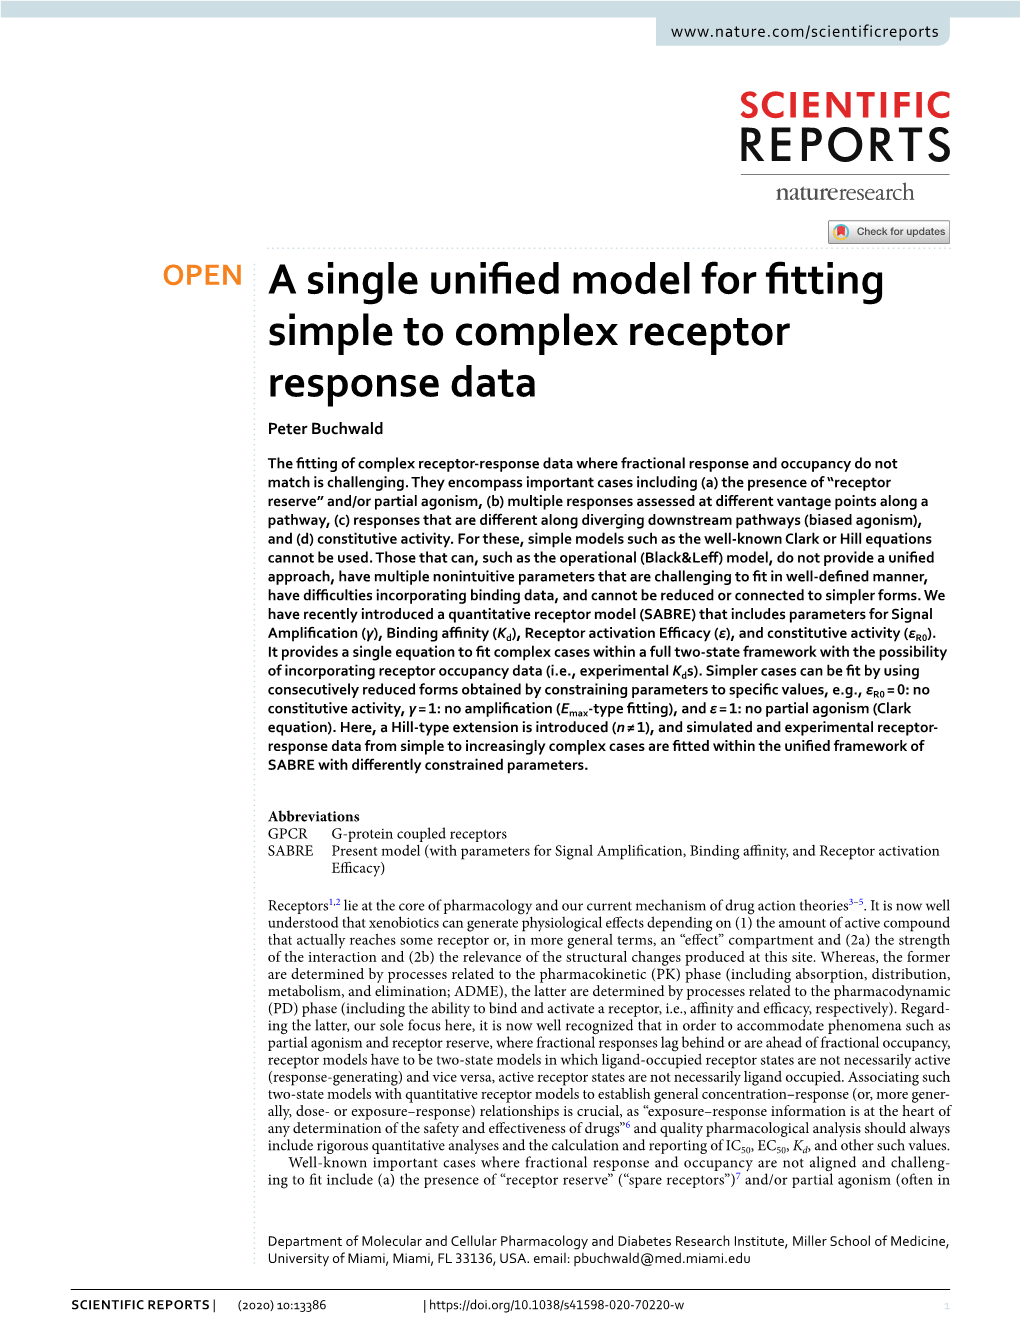 A Single Unified Model for Fitting Simple to Complex Receptor Response Data